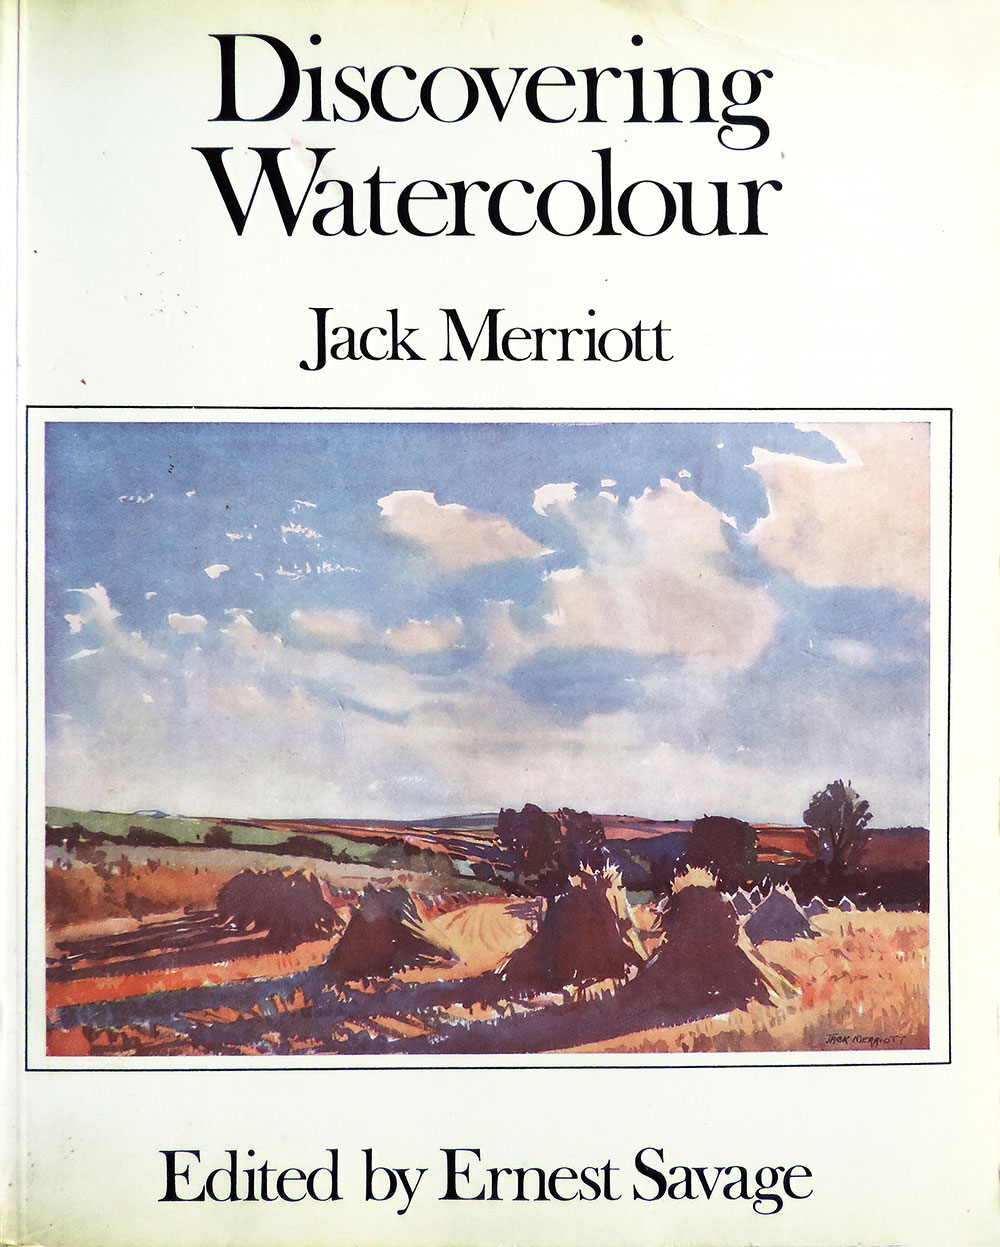 ‘Discovering Watercolour’ by Jack Merriott